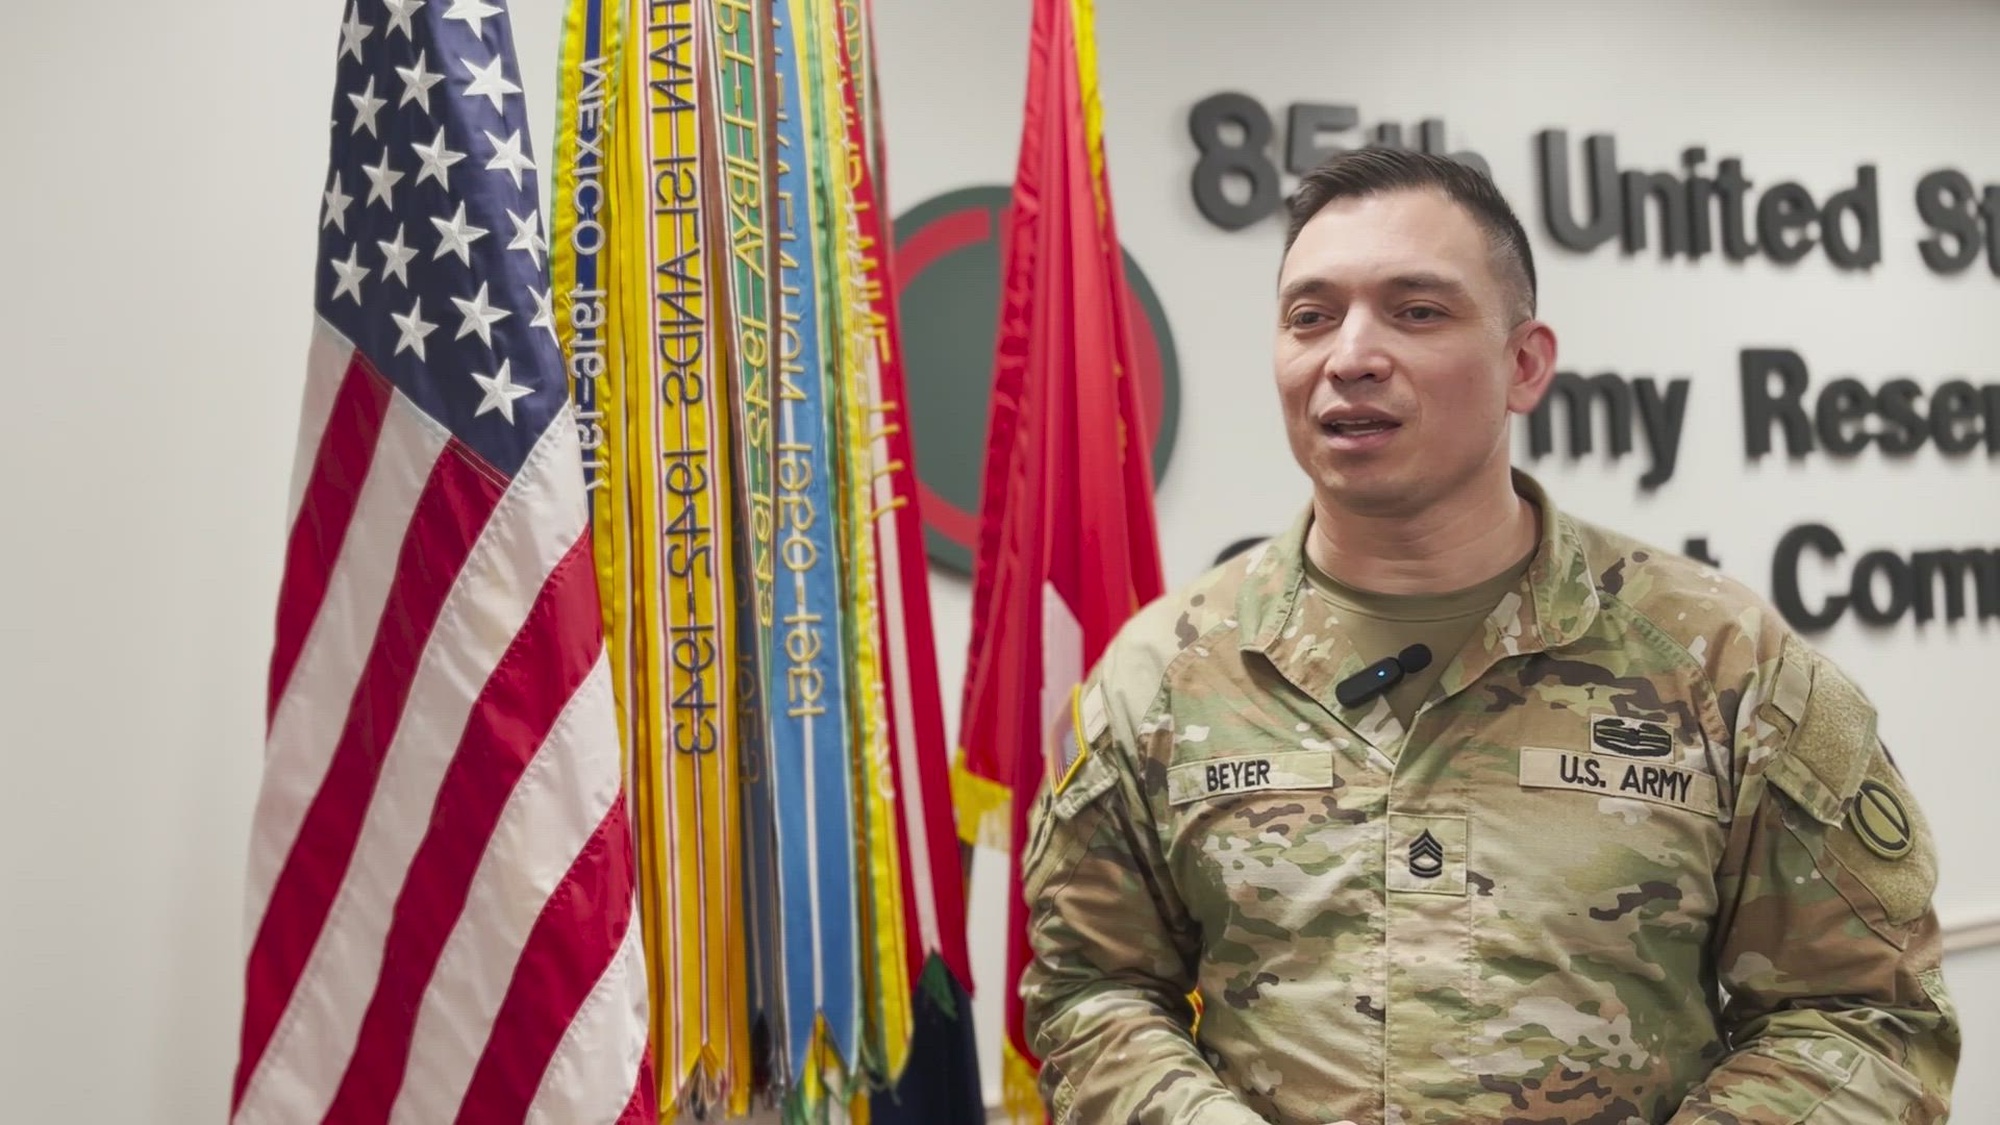 Sgt. 1st Class Tony-James Beyer, Chief Paralegal Non-commissioned Officer, 85th U.S. Army Reserve Support Command, shares his story of service and why she serves.
(U.S. Army Reserve video by Staff Sgt. Erika Whitaker)